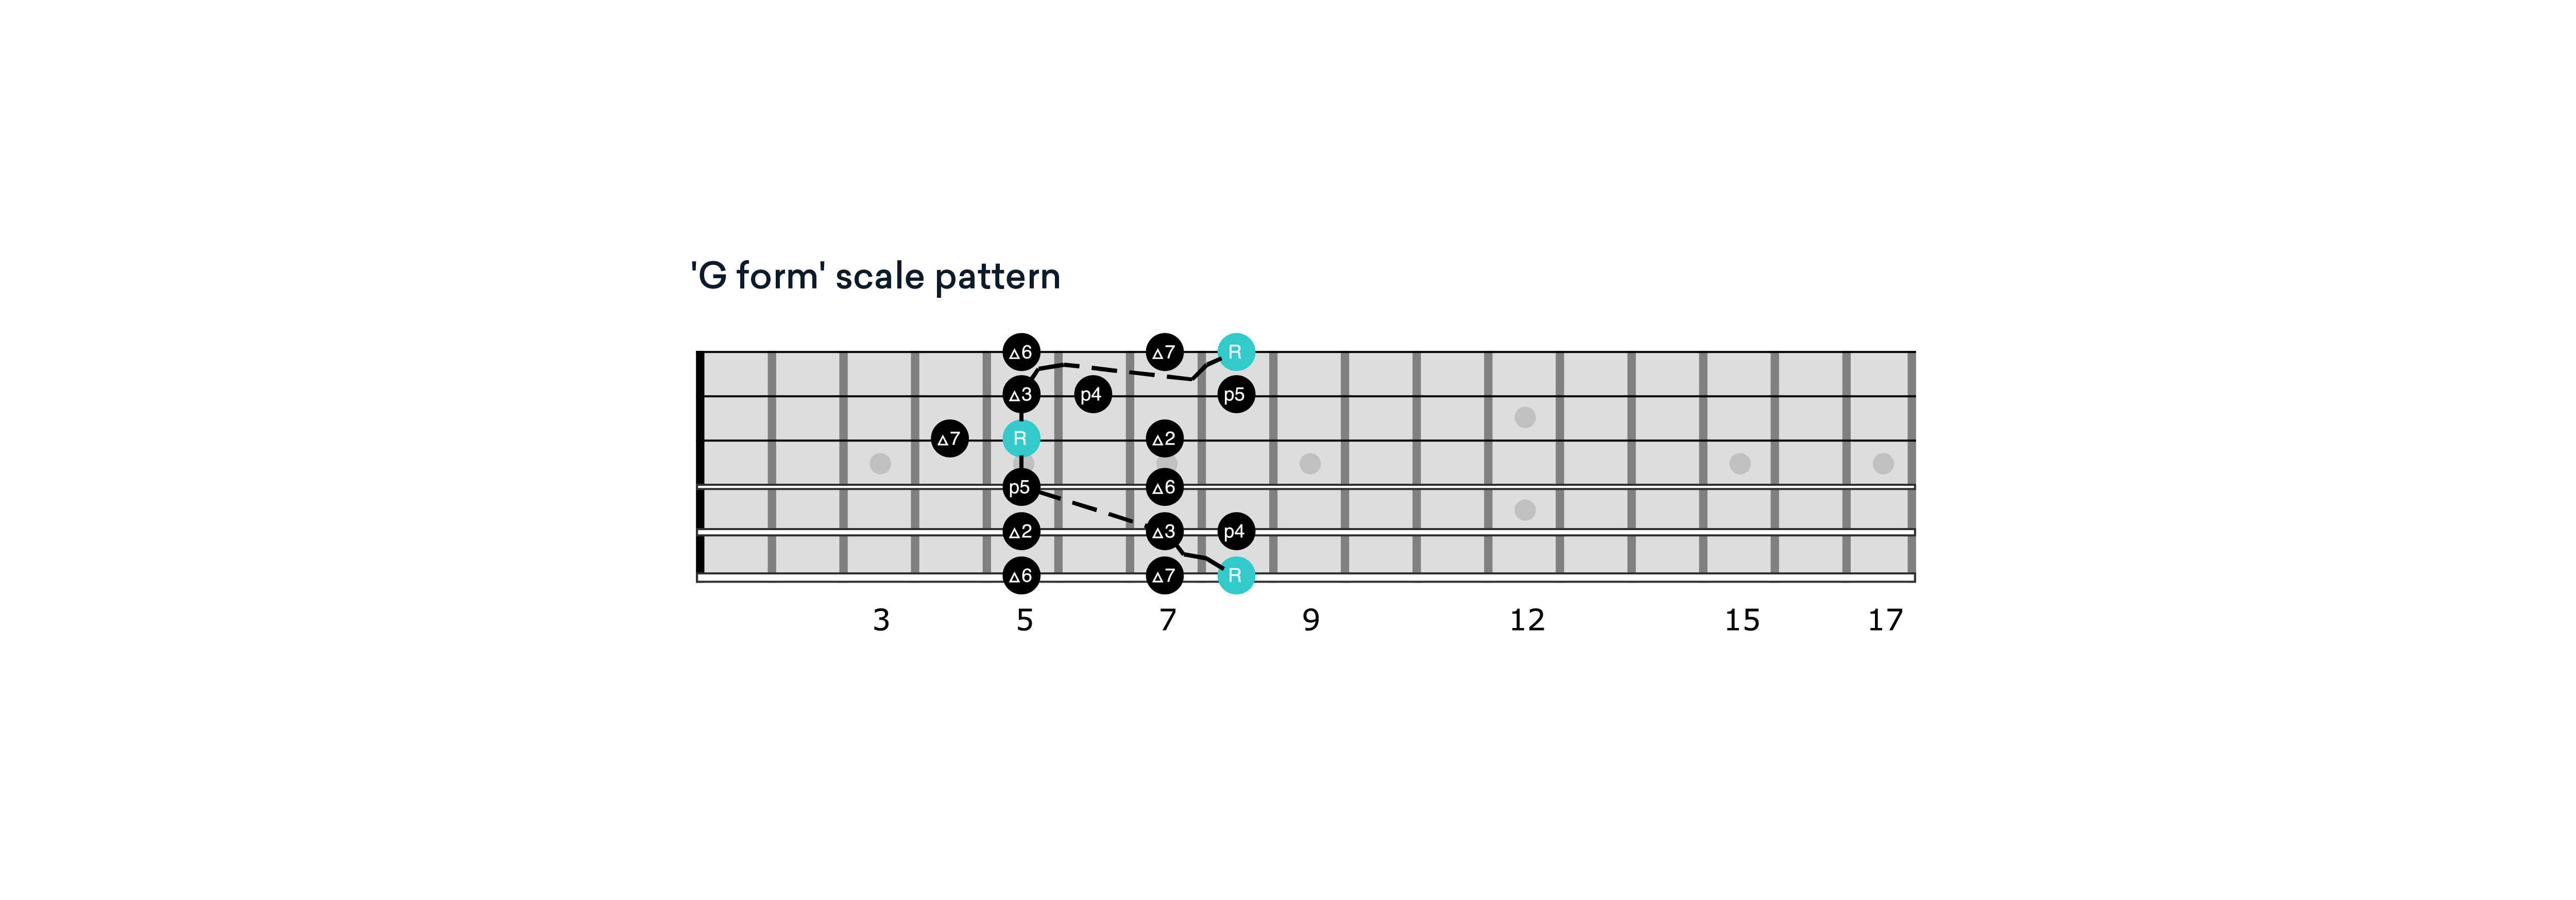 CAGED G scale pattern